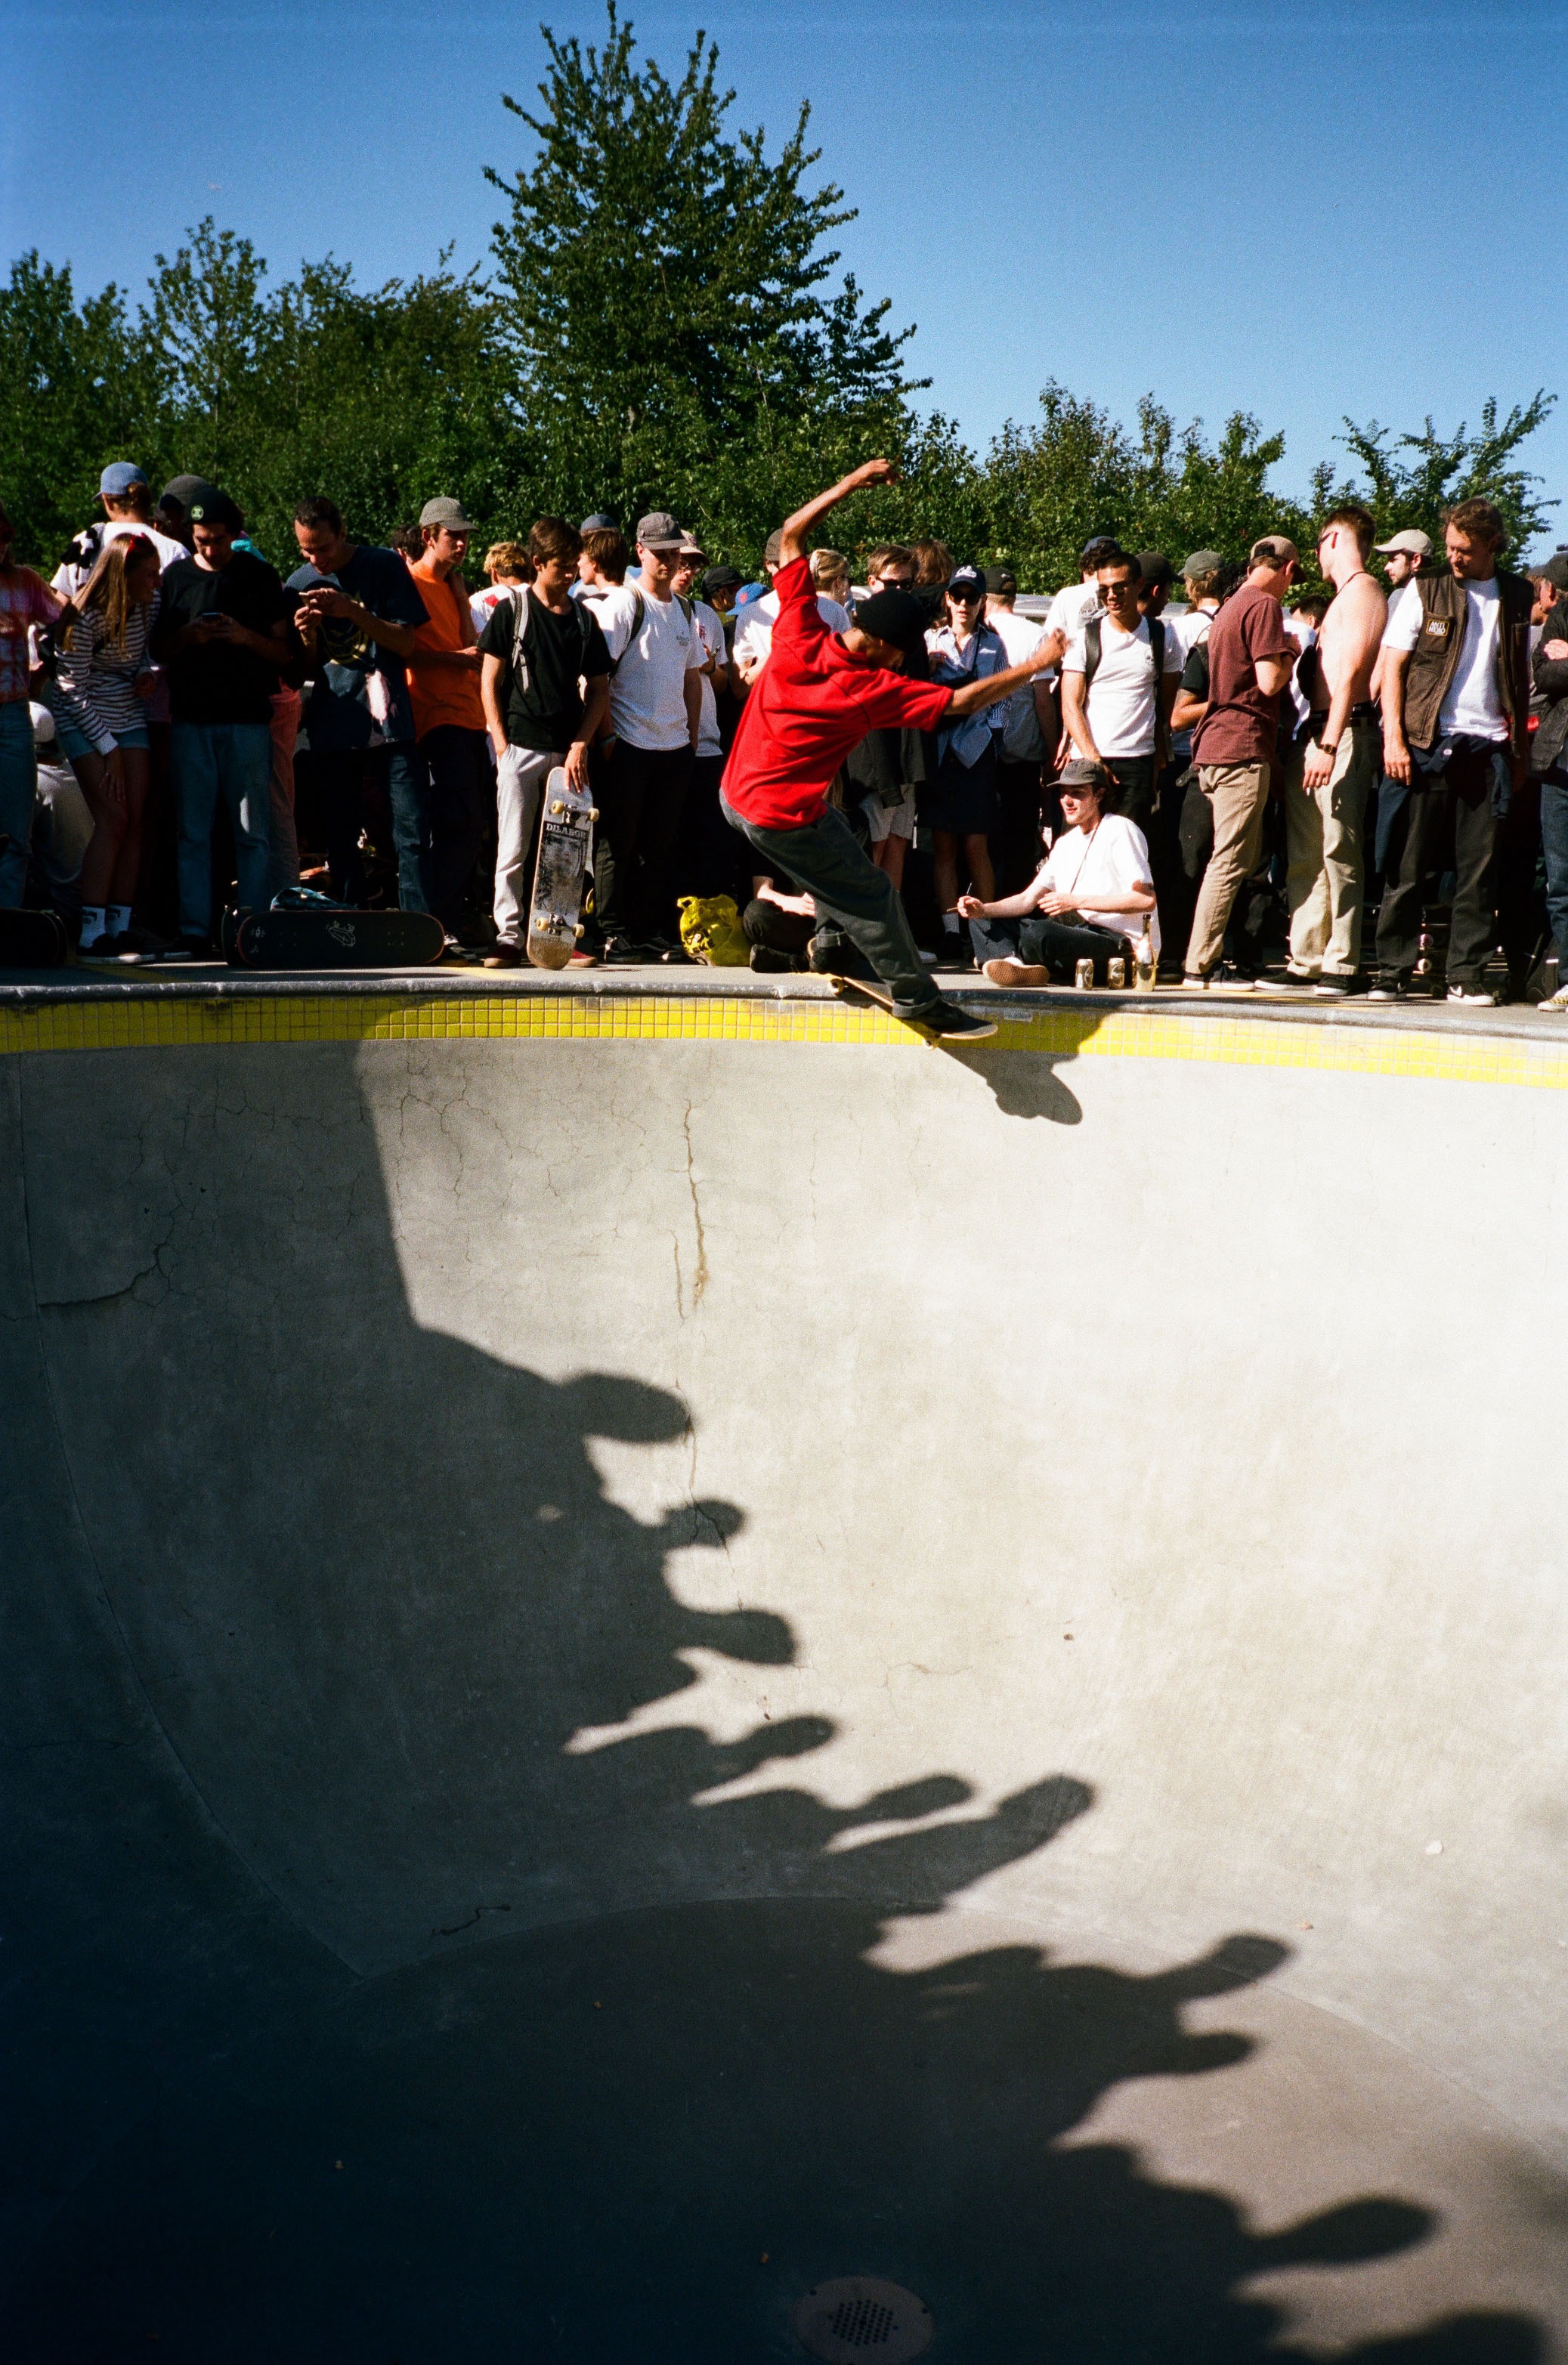 unknown, fs 5.0. Photography by Yentl Touboul